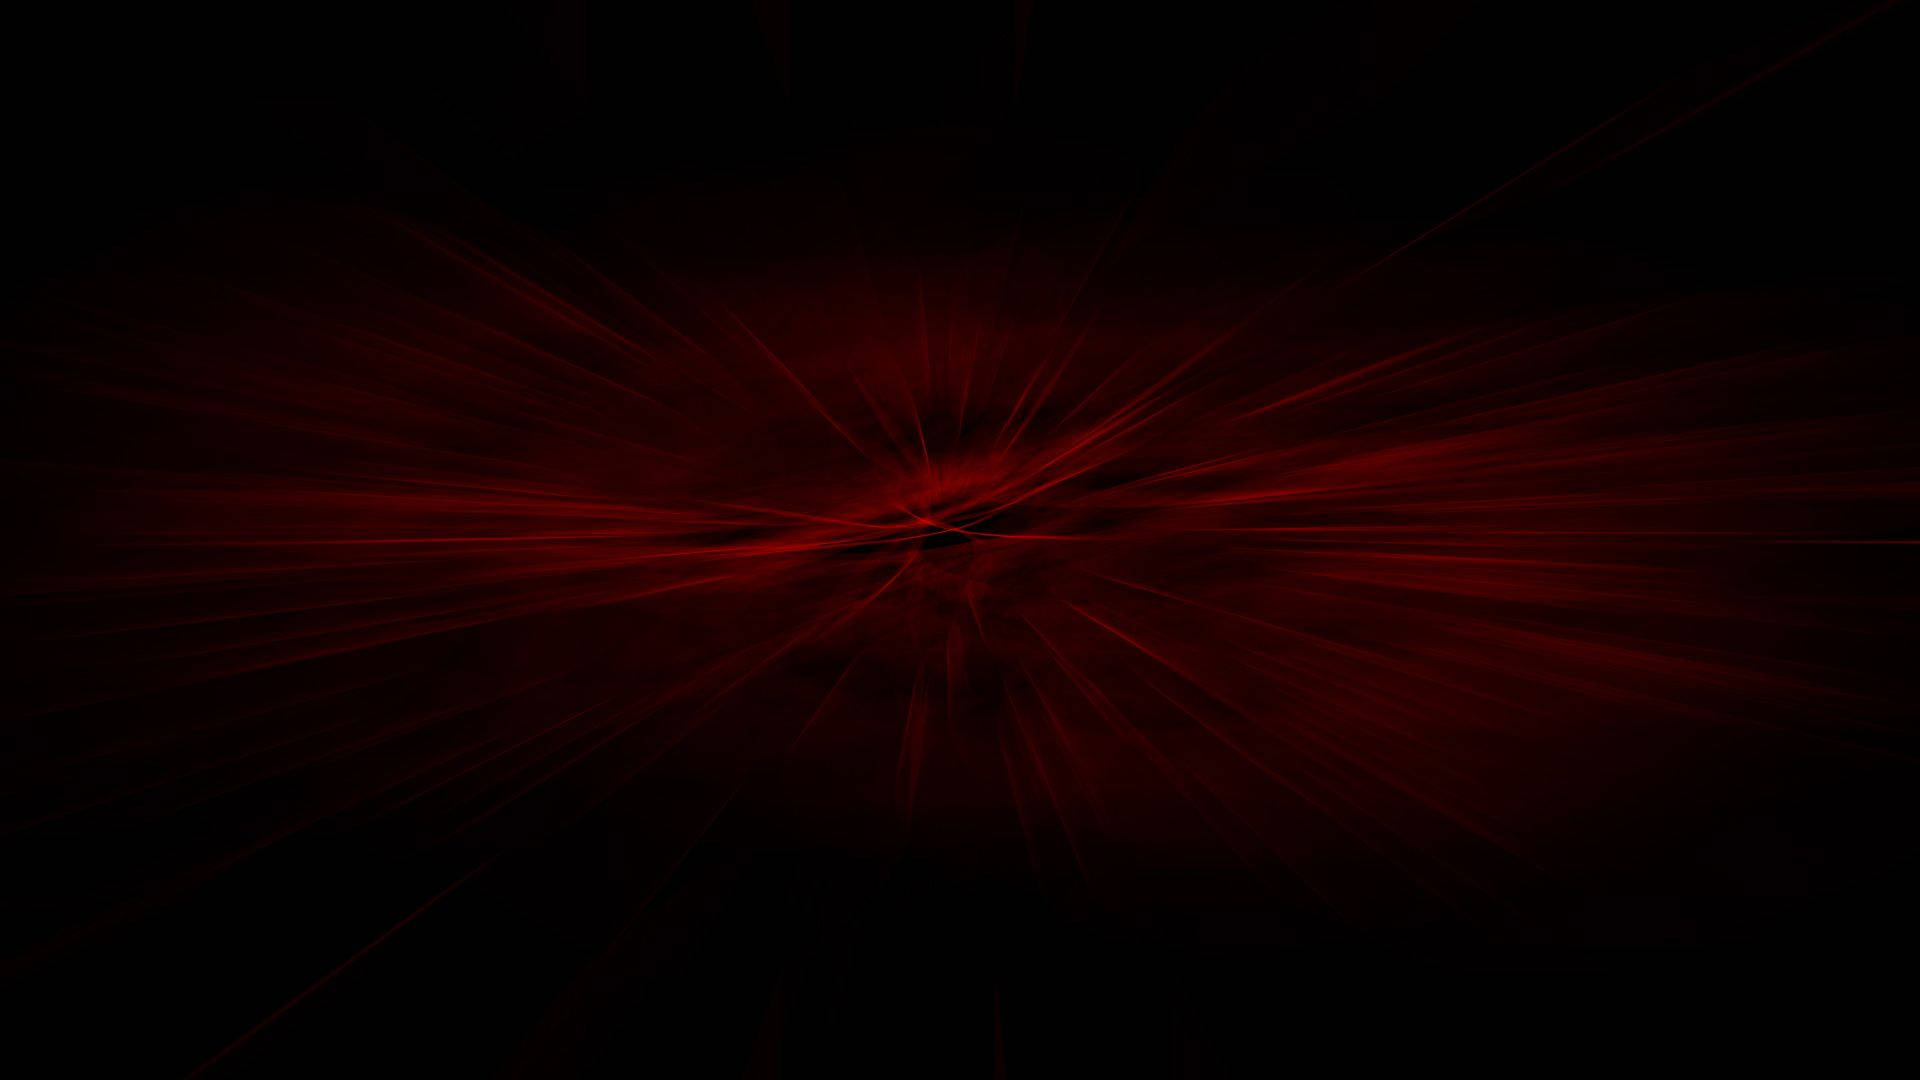 Accelerate with Red and Black Wallpaper